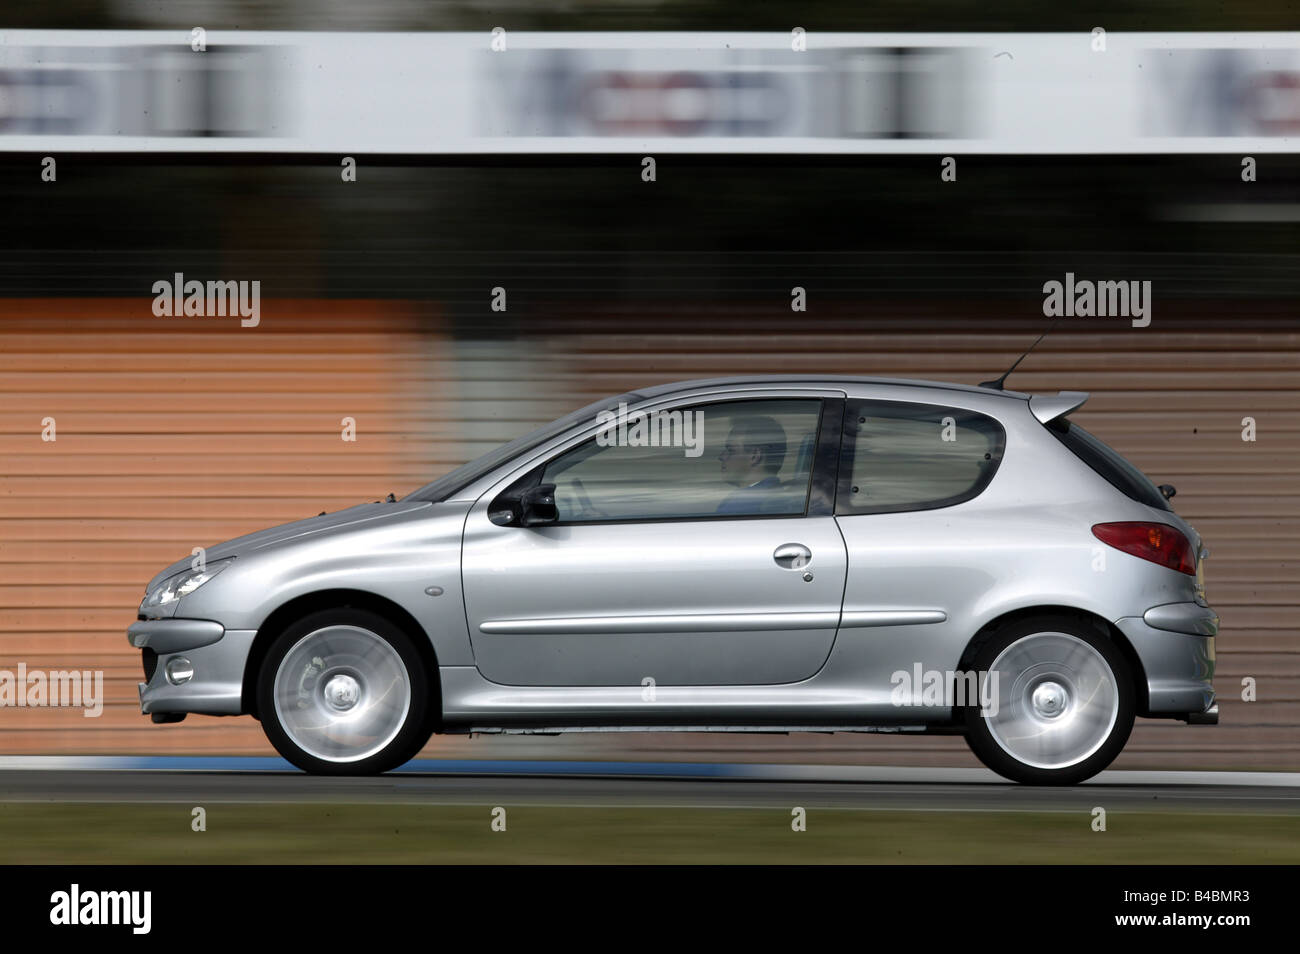 Car, Peugeot 206 RC, Limousine, small approx., model year 2003-, silver,  driving, side view, Test track Stock Photo - Alamy